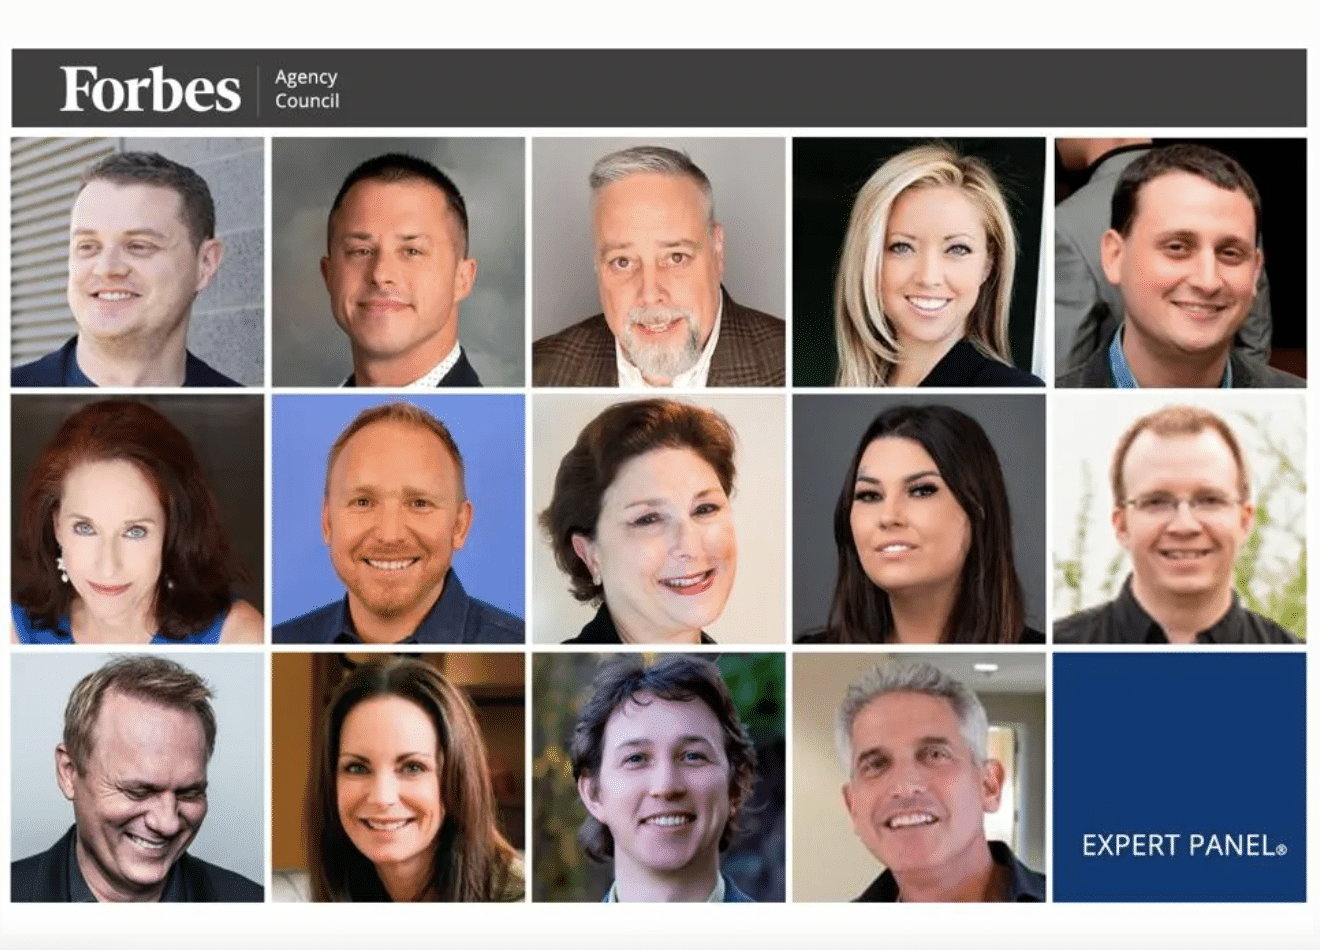 Grid of photos of Forbes Agency Council Members